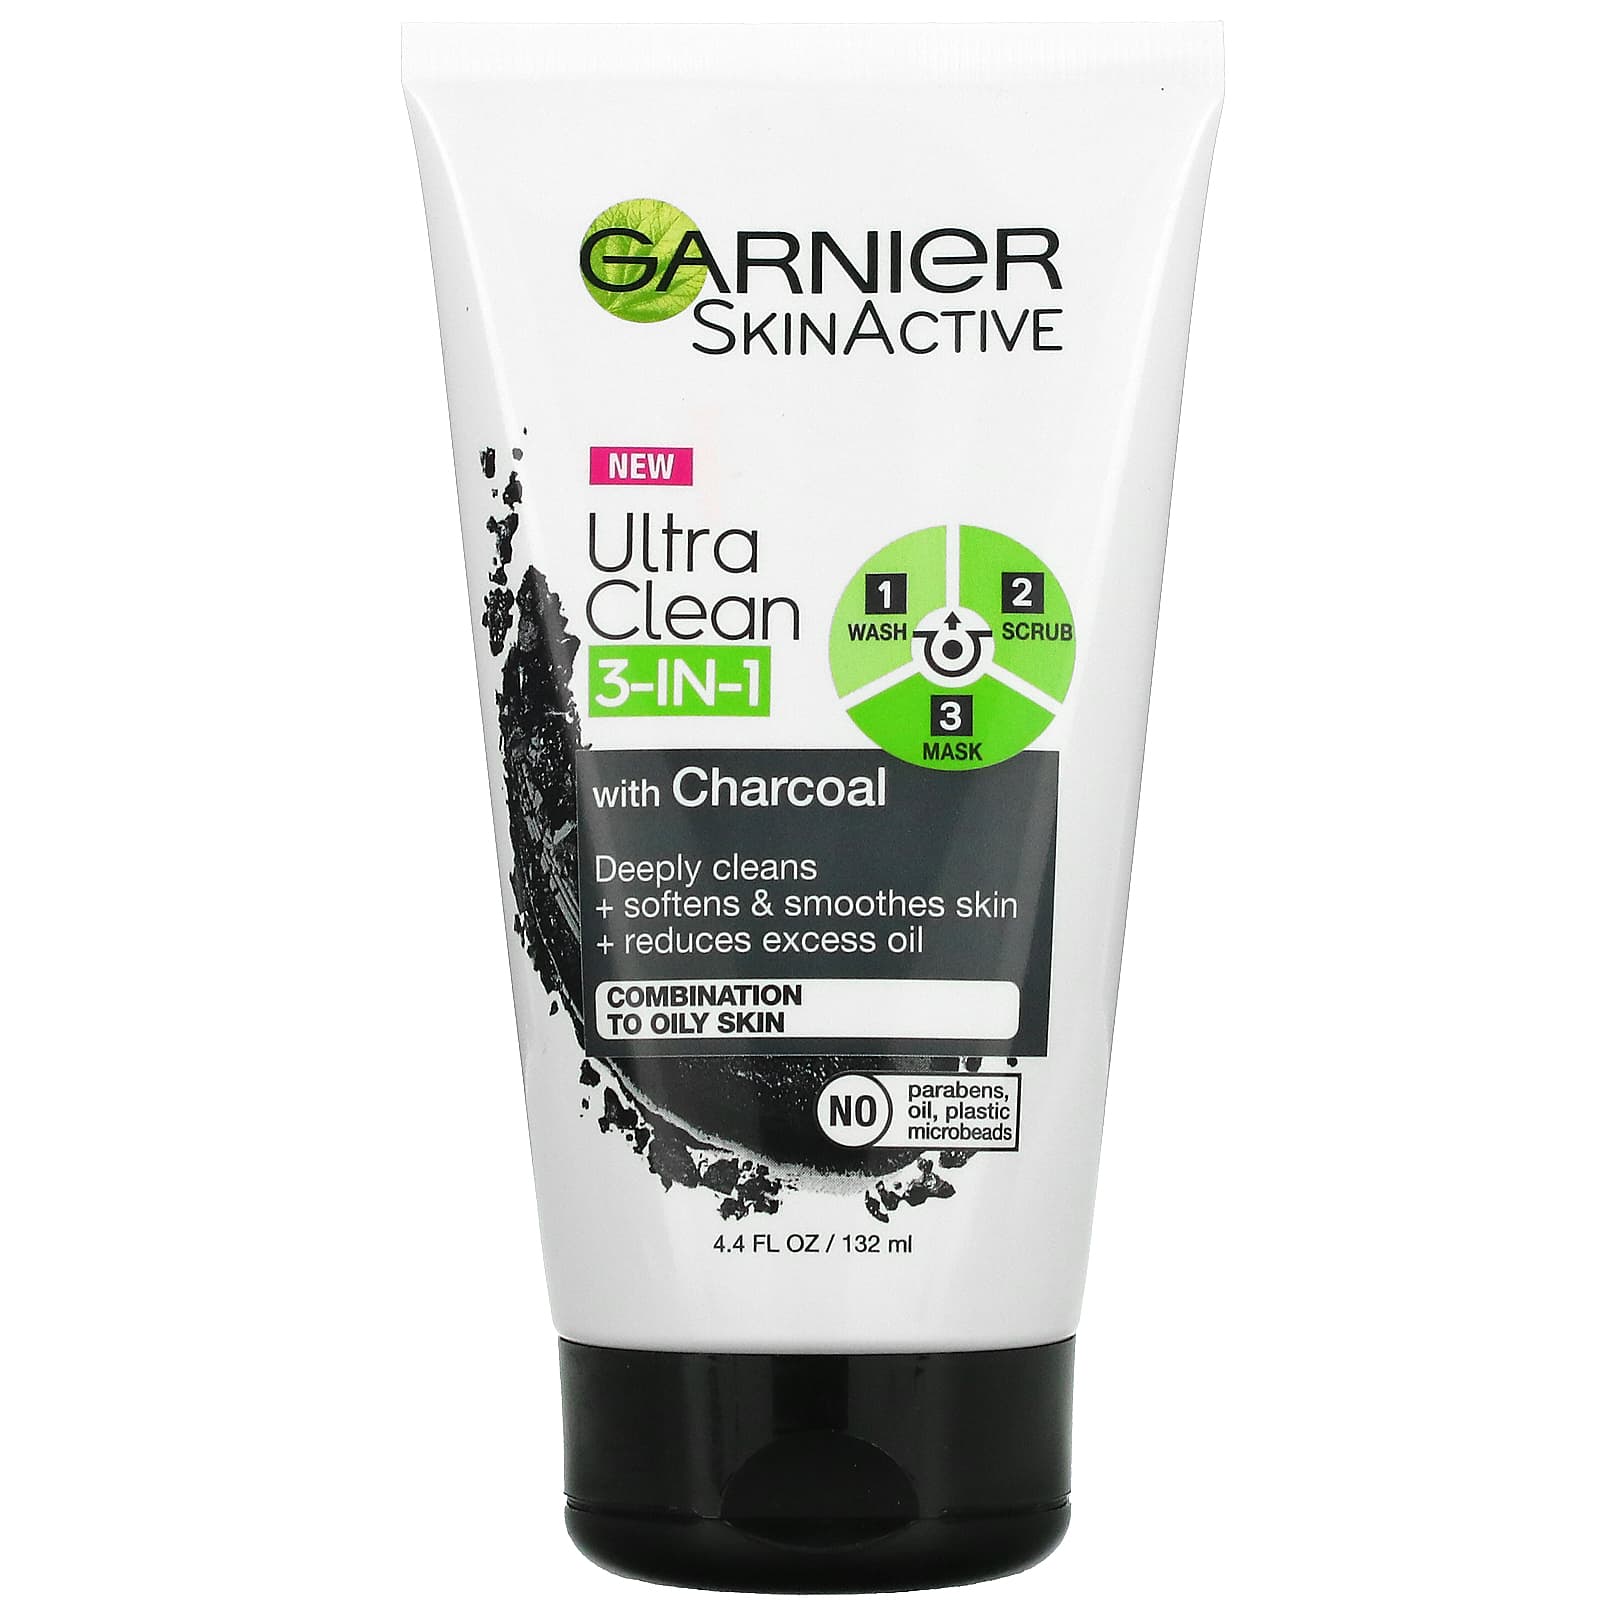 Garnier, SkinActive, Ultra Clean 3-In-1 with Charcoal (132 ml)